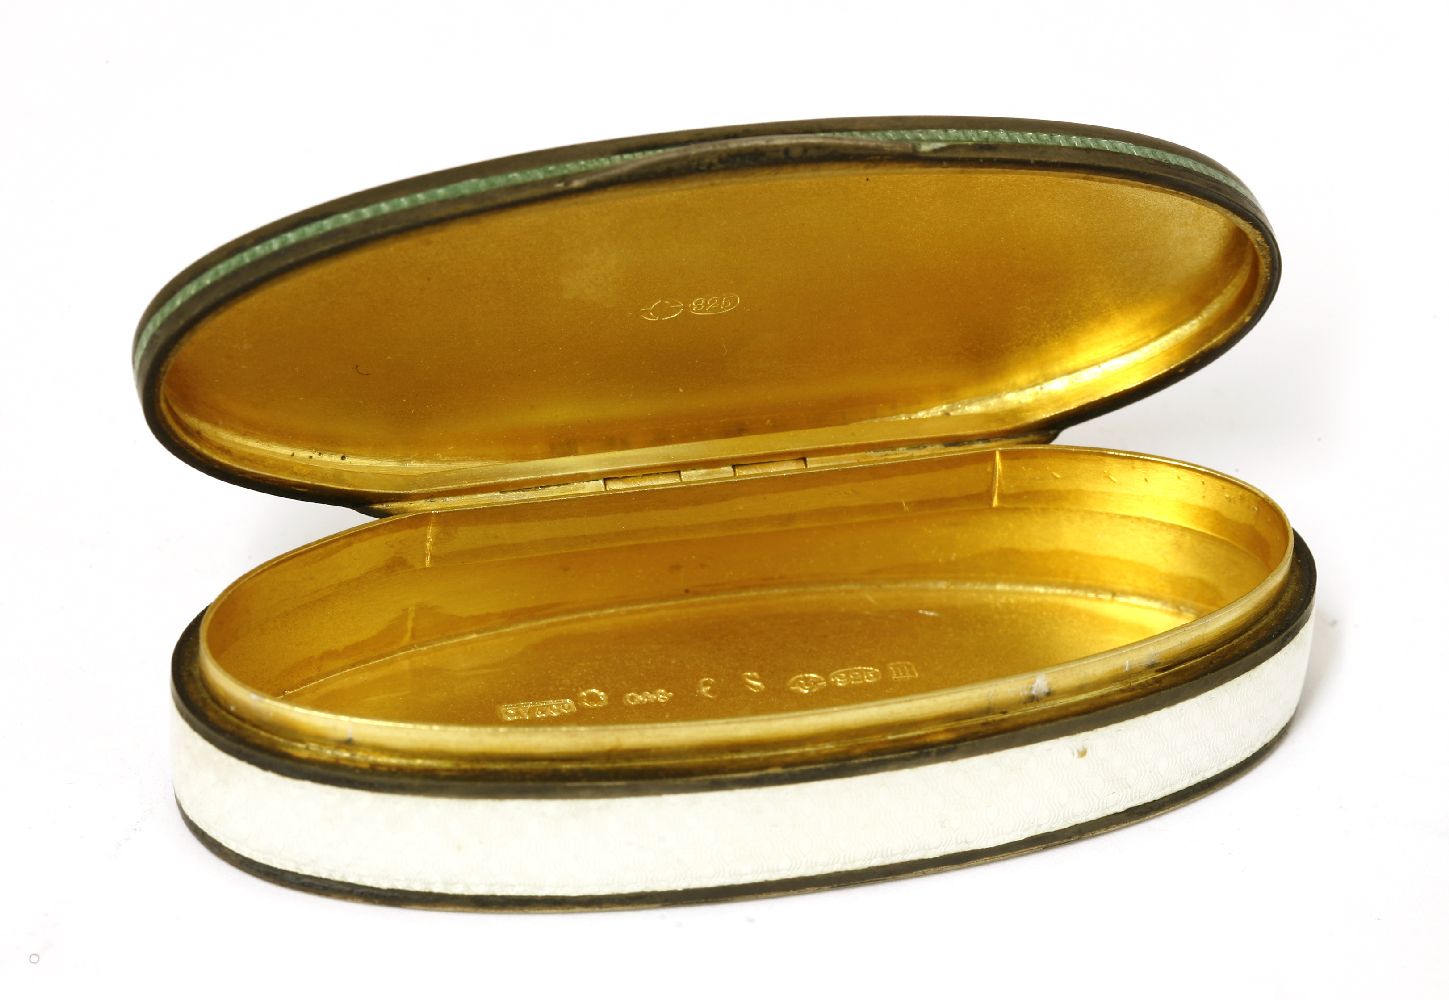 An oval silver gilt and enamel pill box,import marks, London 1887,with engine turned decoration, - Image 2 of 2